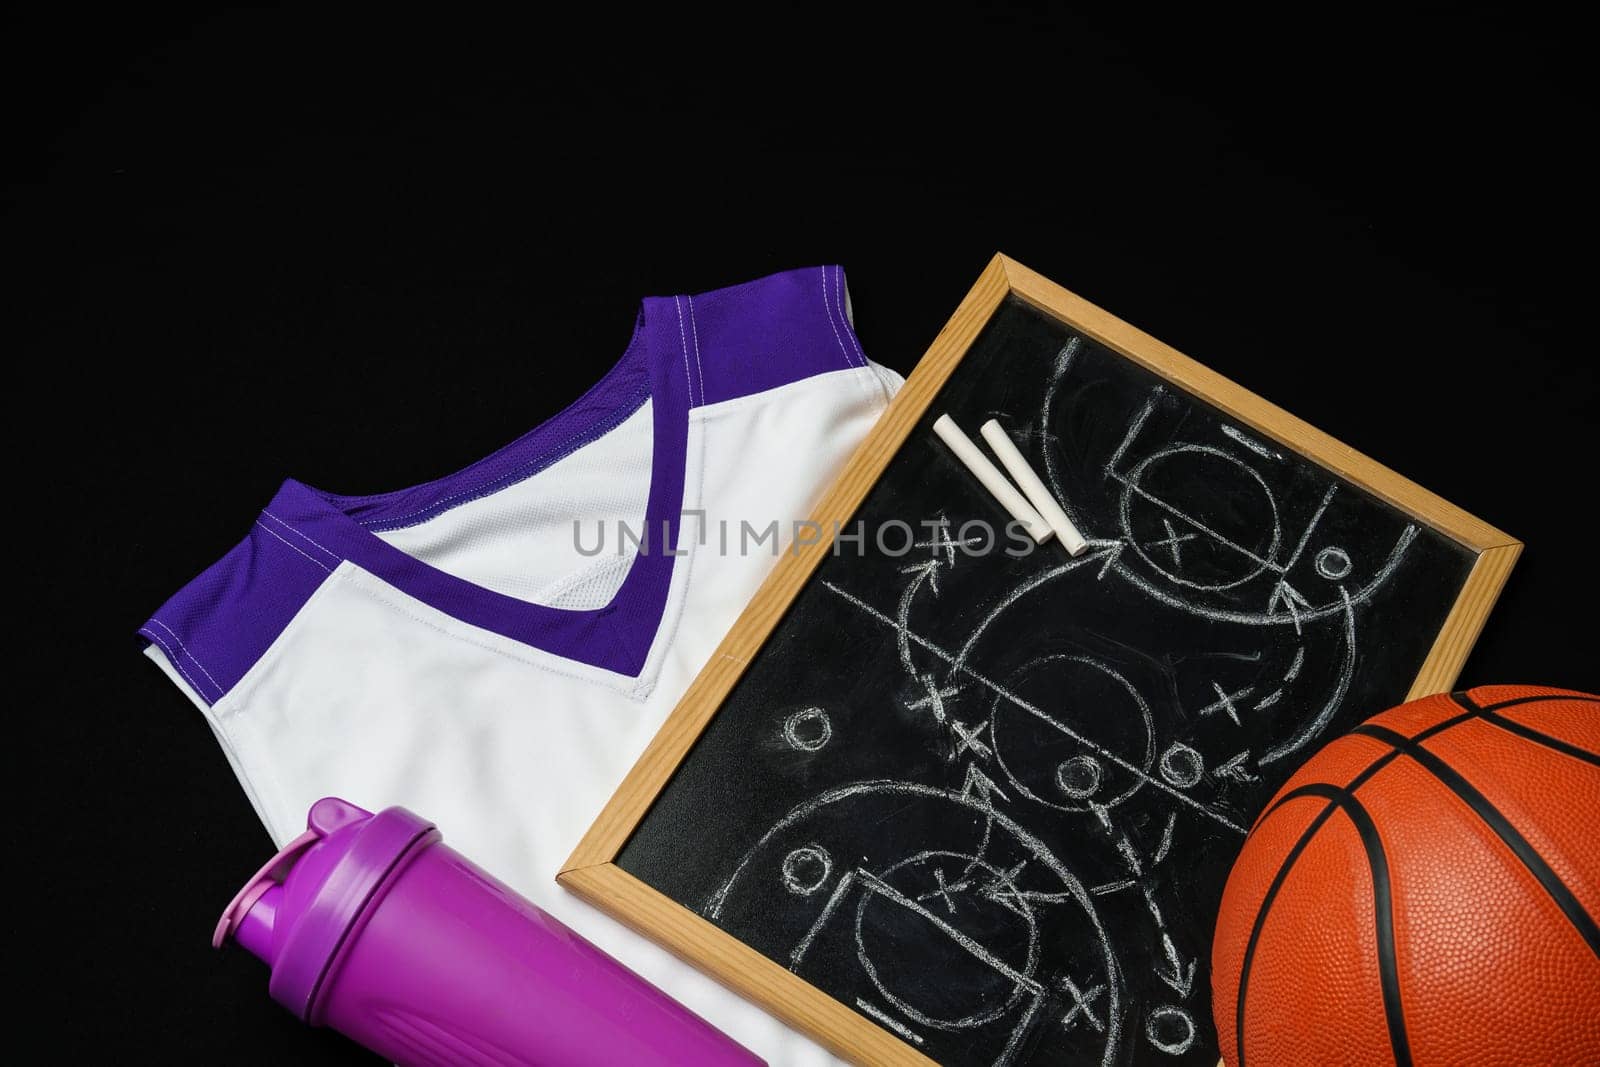 A basketball, along with a strategic play diagrammed on a chalkboard, rests near a folded jersey and a sports bottle. The equipment is arranged on a dark surface, suggesting preparation for a game or a coaching session in progress.